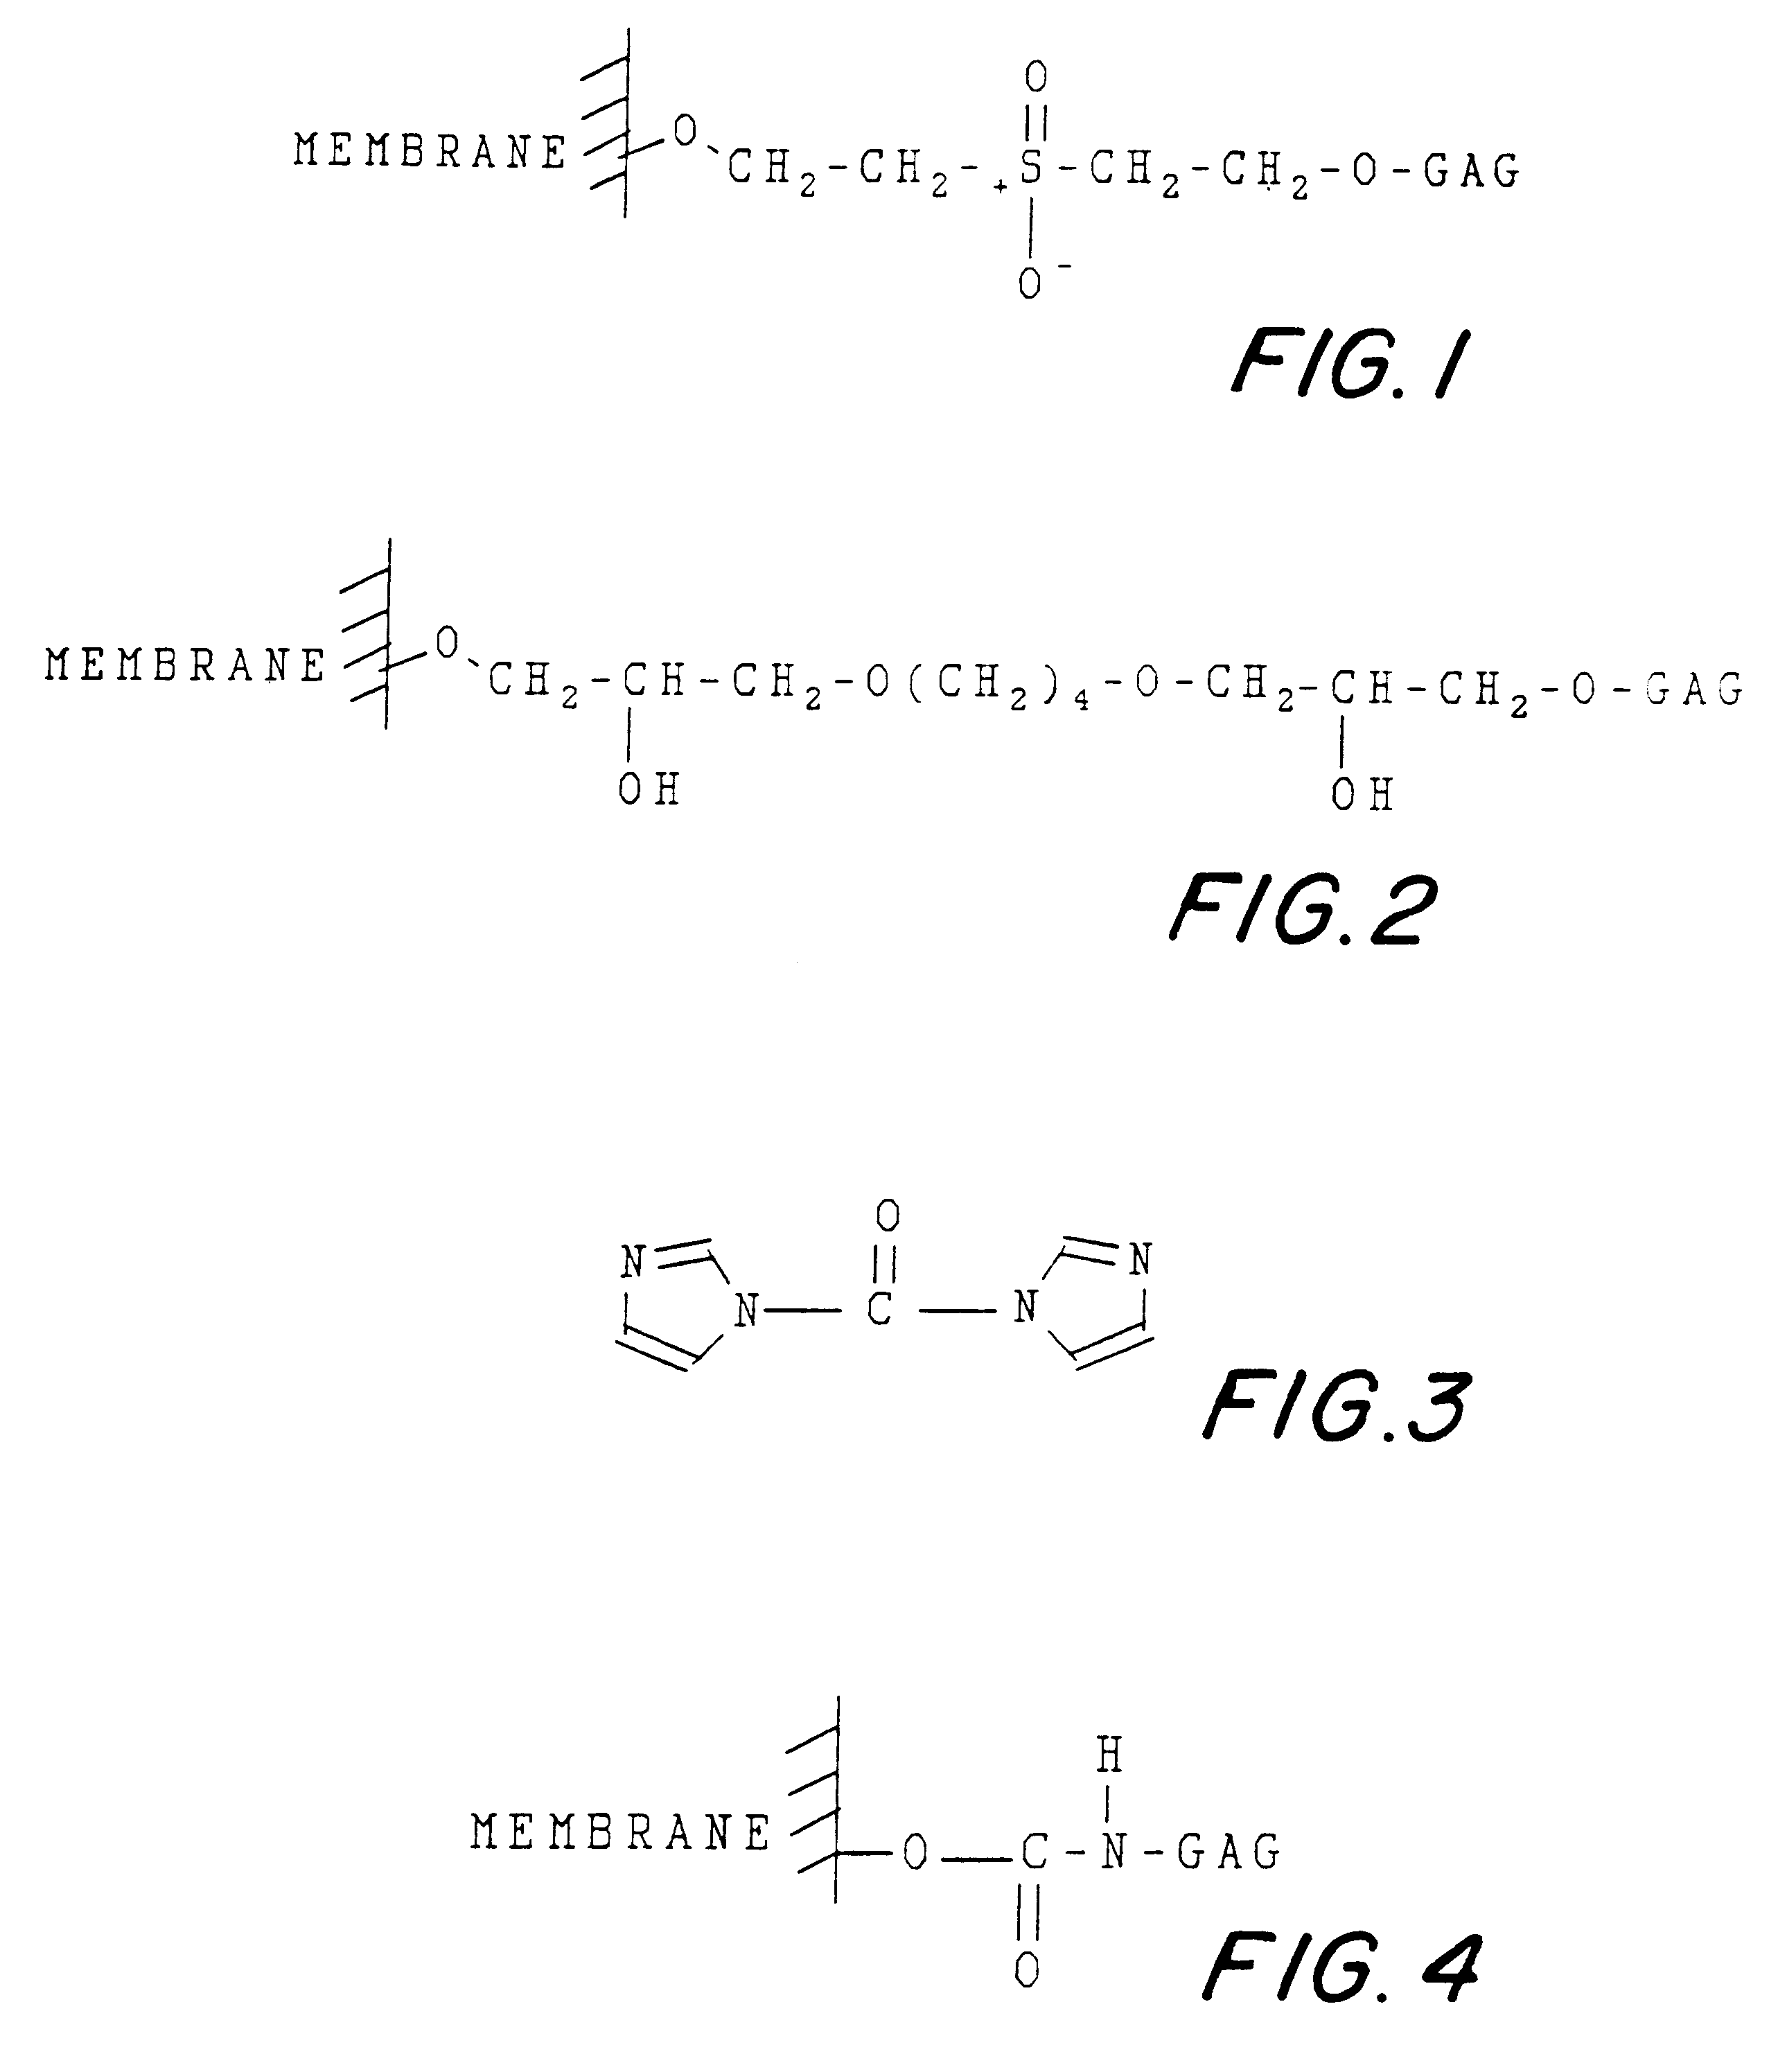 Non-immunogenic, biocompatible macromolecular membrane compositions, and methods for making them